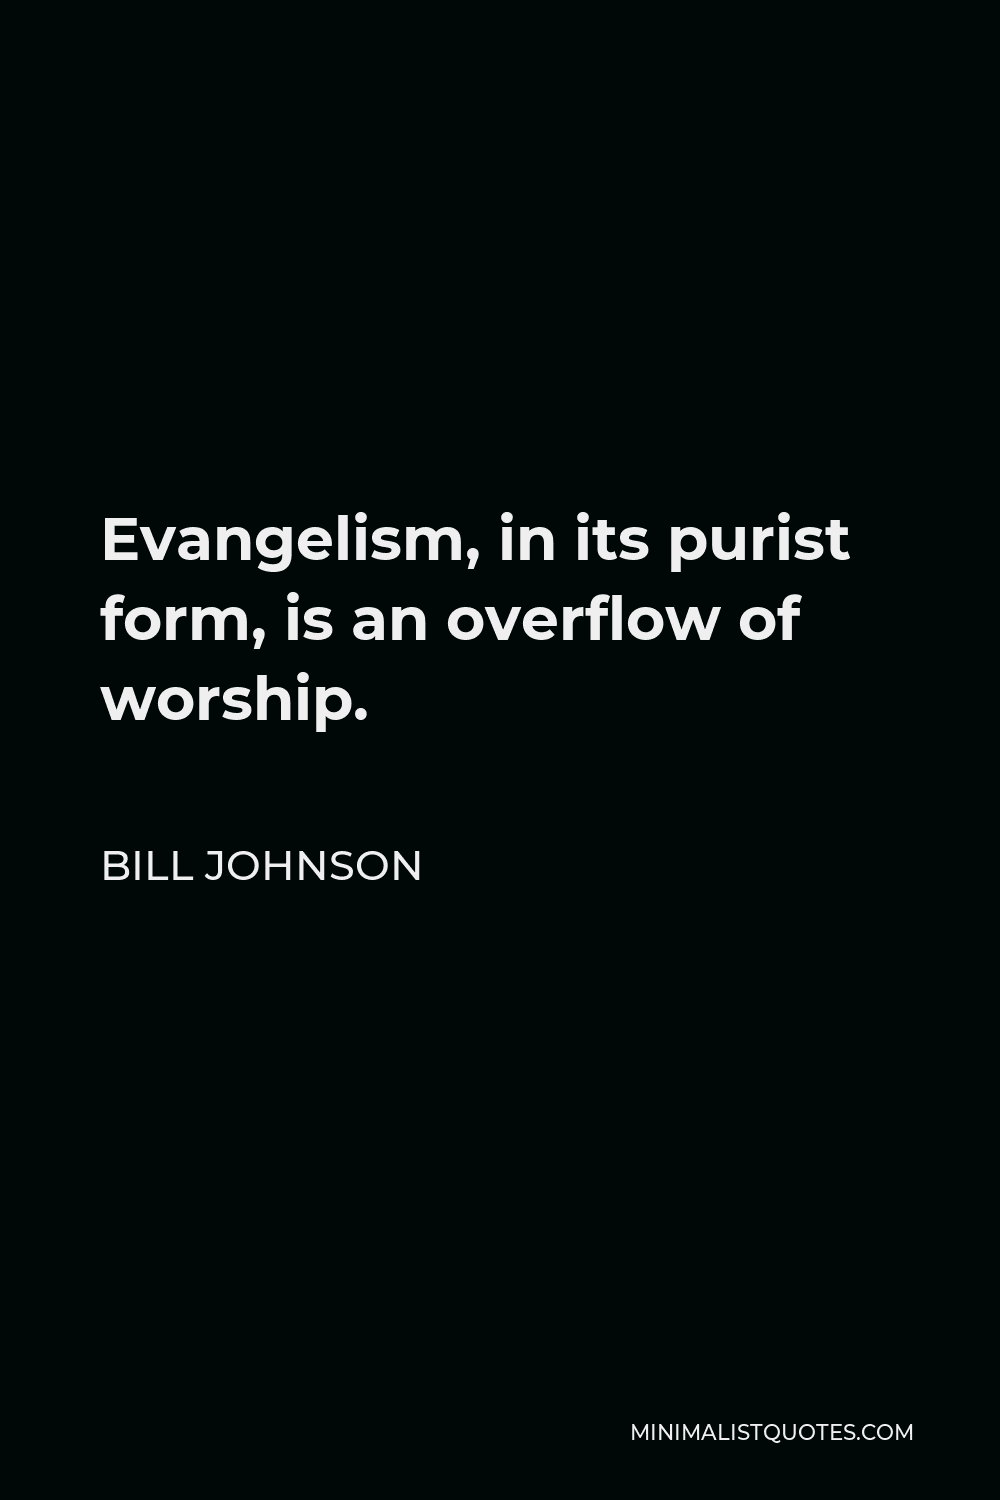 Bill Johnson Quote - Evangelism, in its purist form, is an overflow of worship.